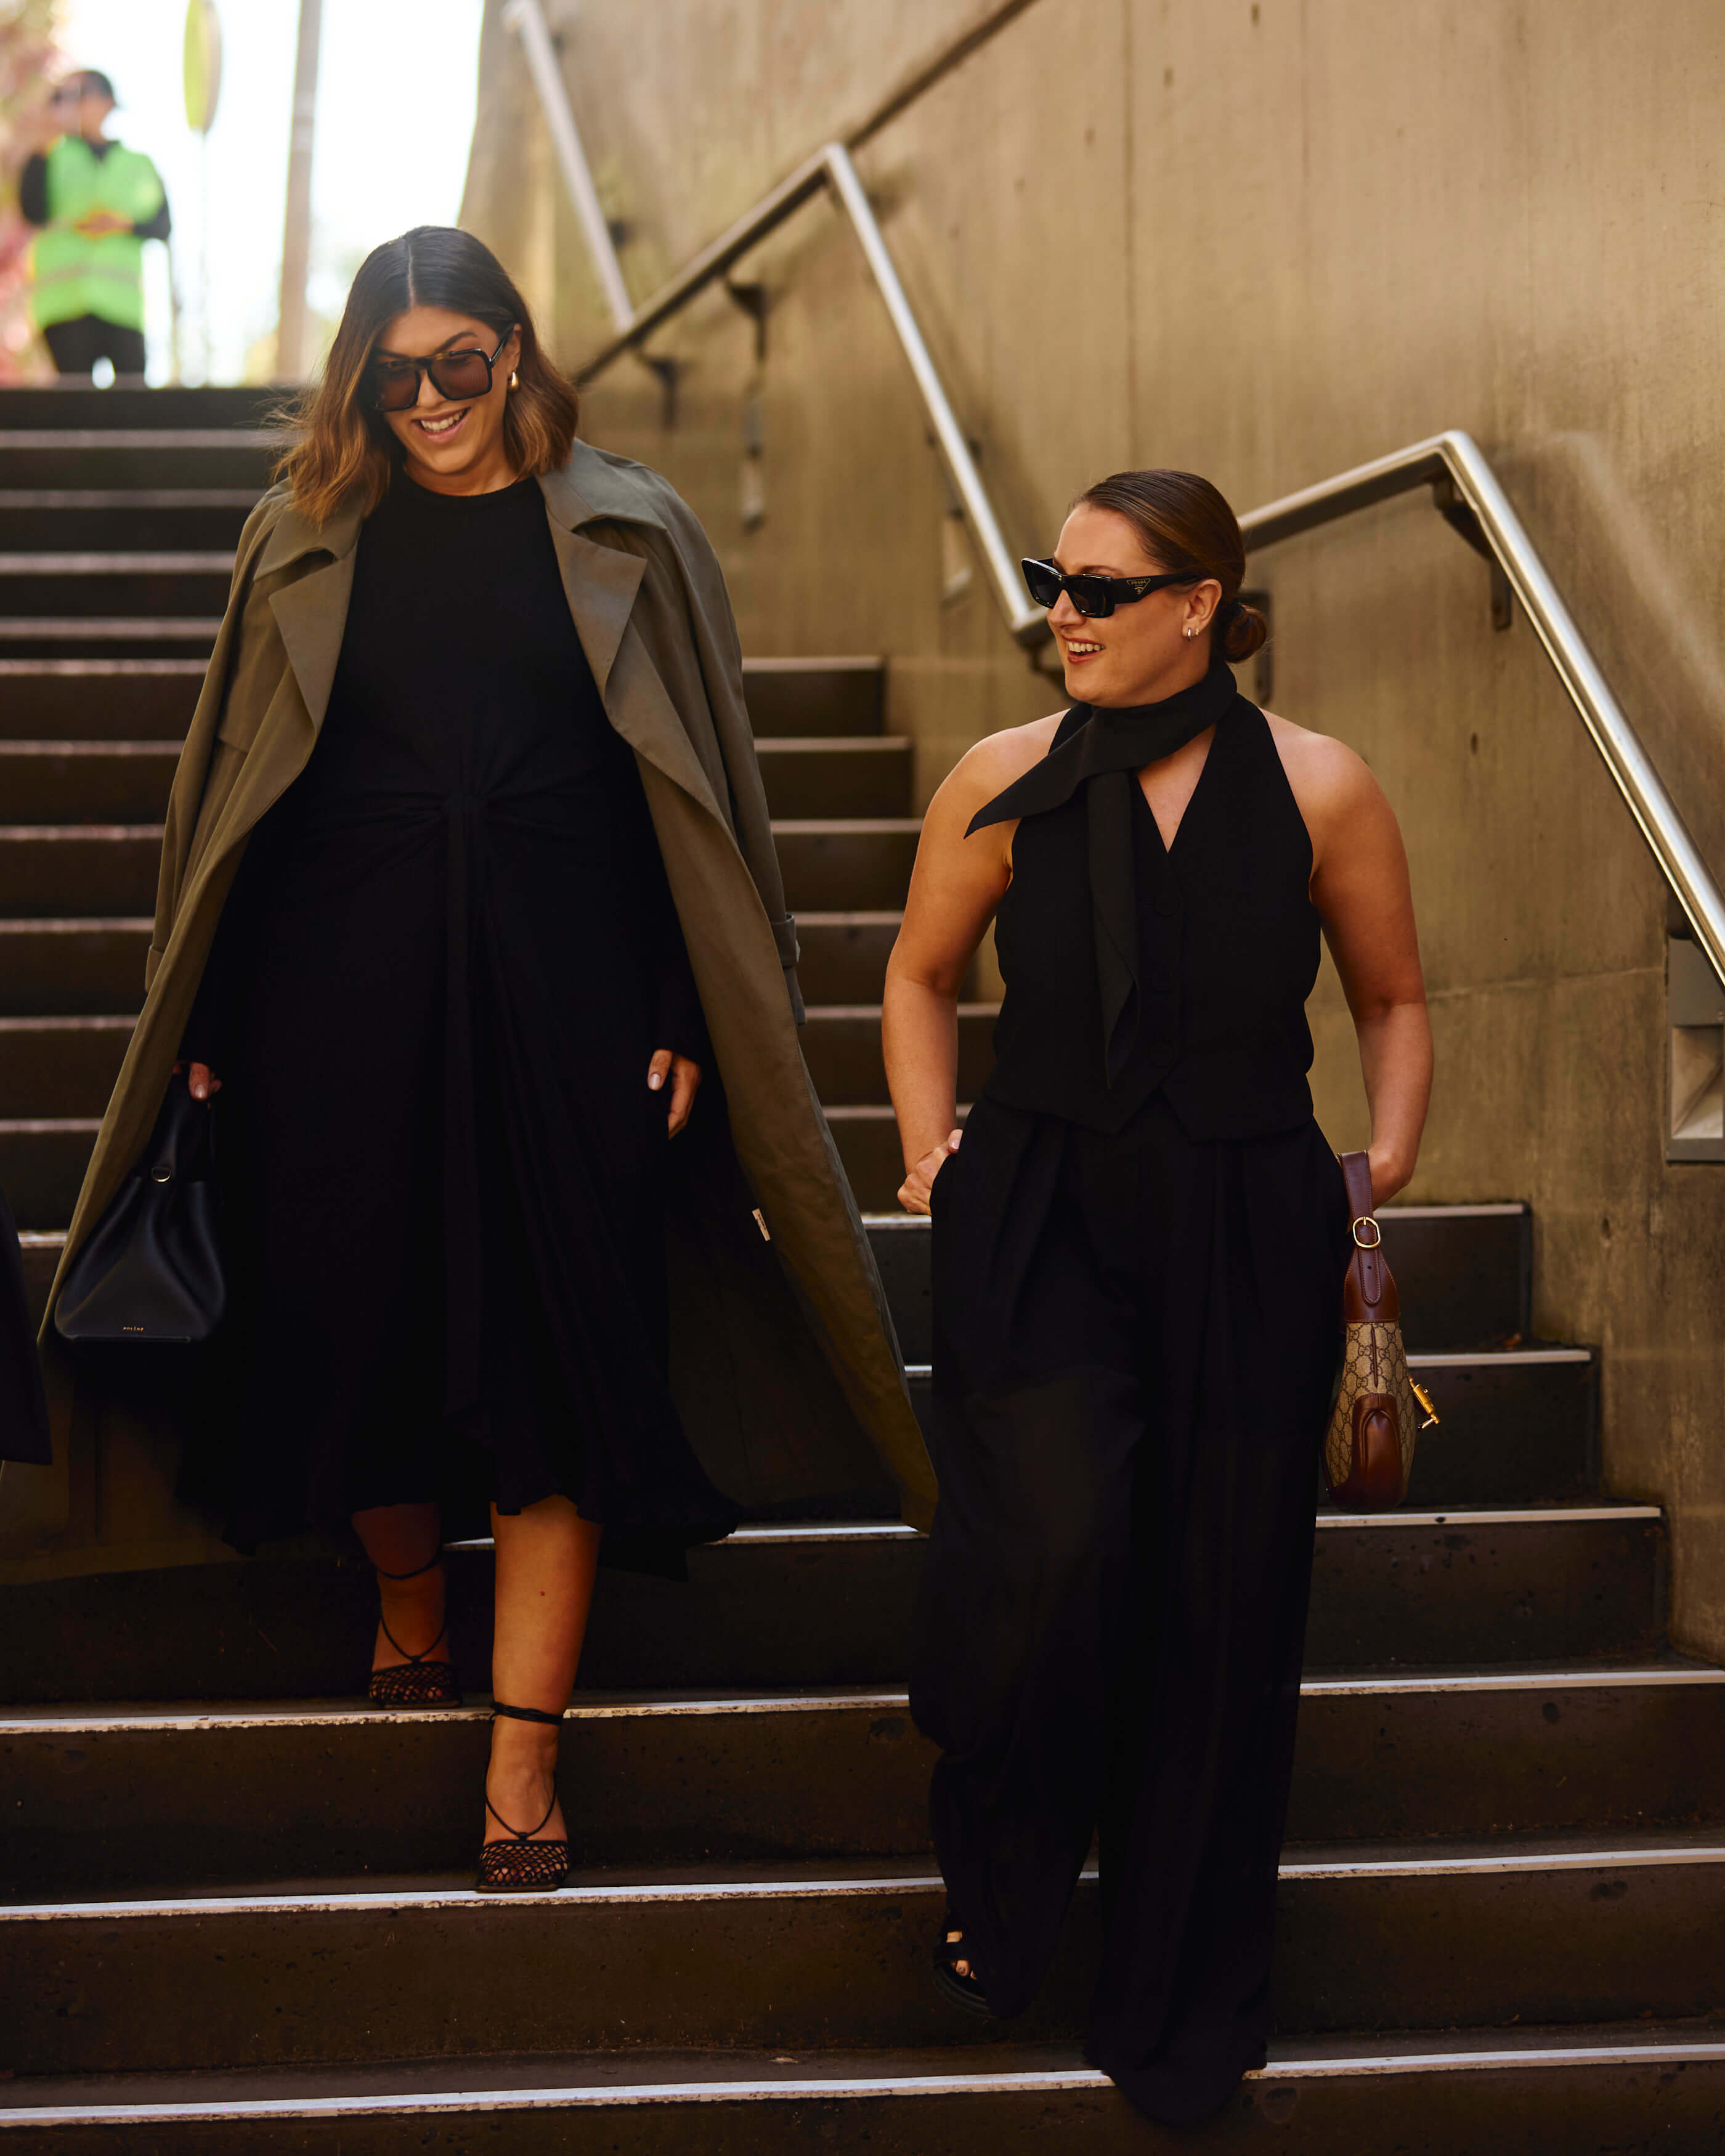 Bec and Marissa Karagiorgos wear the Olive Crepe Composition Jacket, Mori Mini Dress, Khaki Twill Henri Trench and Black Jersey Figurative Dress from Bianca Spender at Sydney's Carriageworks 